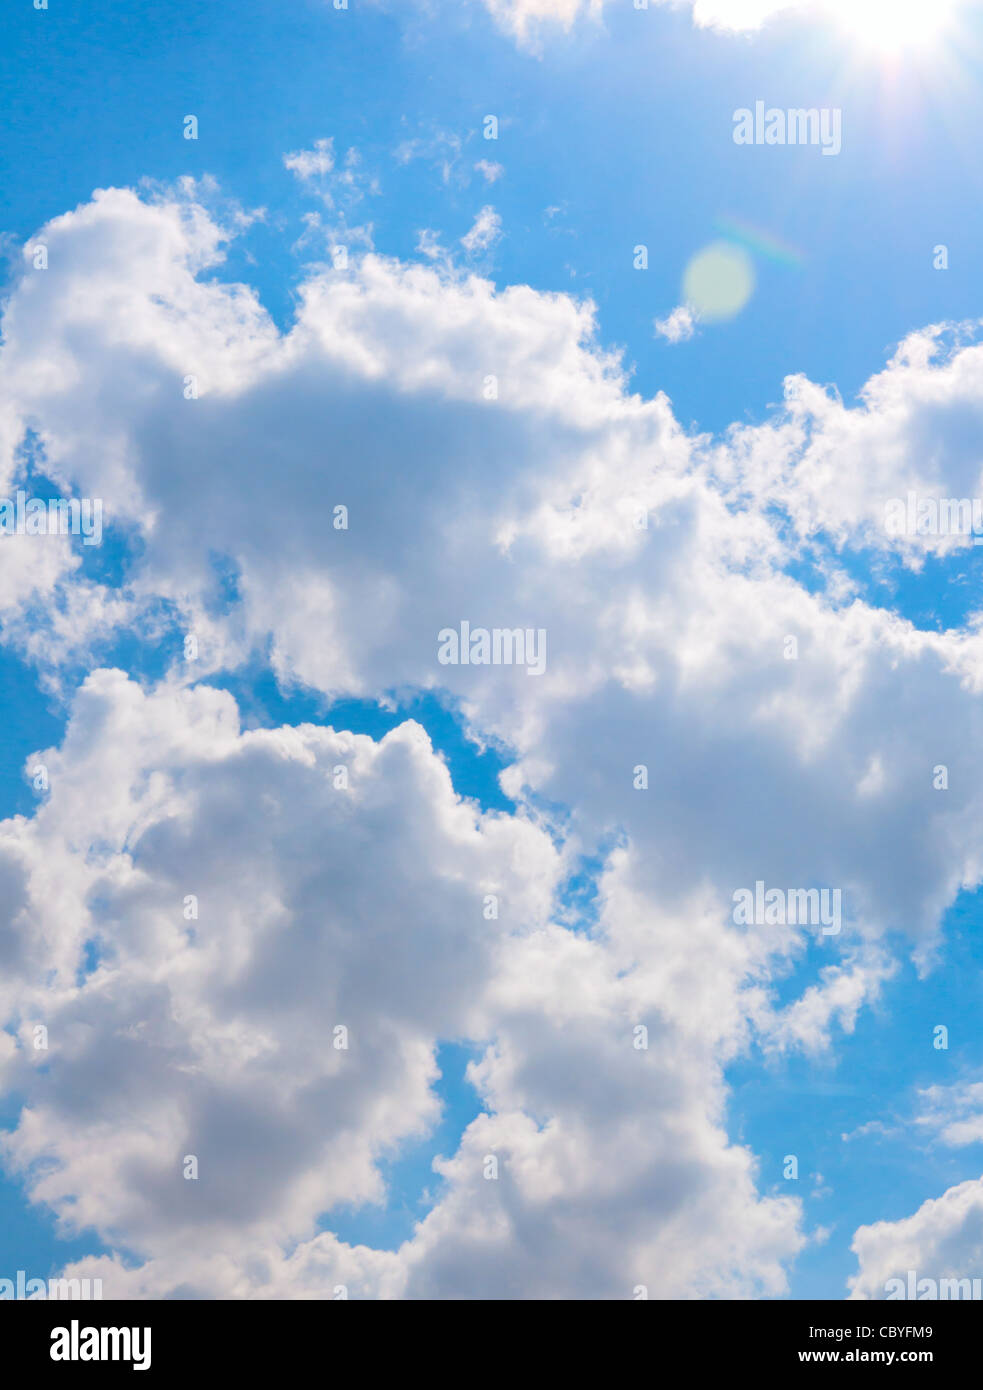 Summer blue sky with clouds and sun Stock Photo